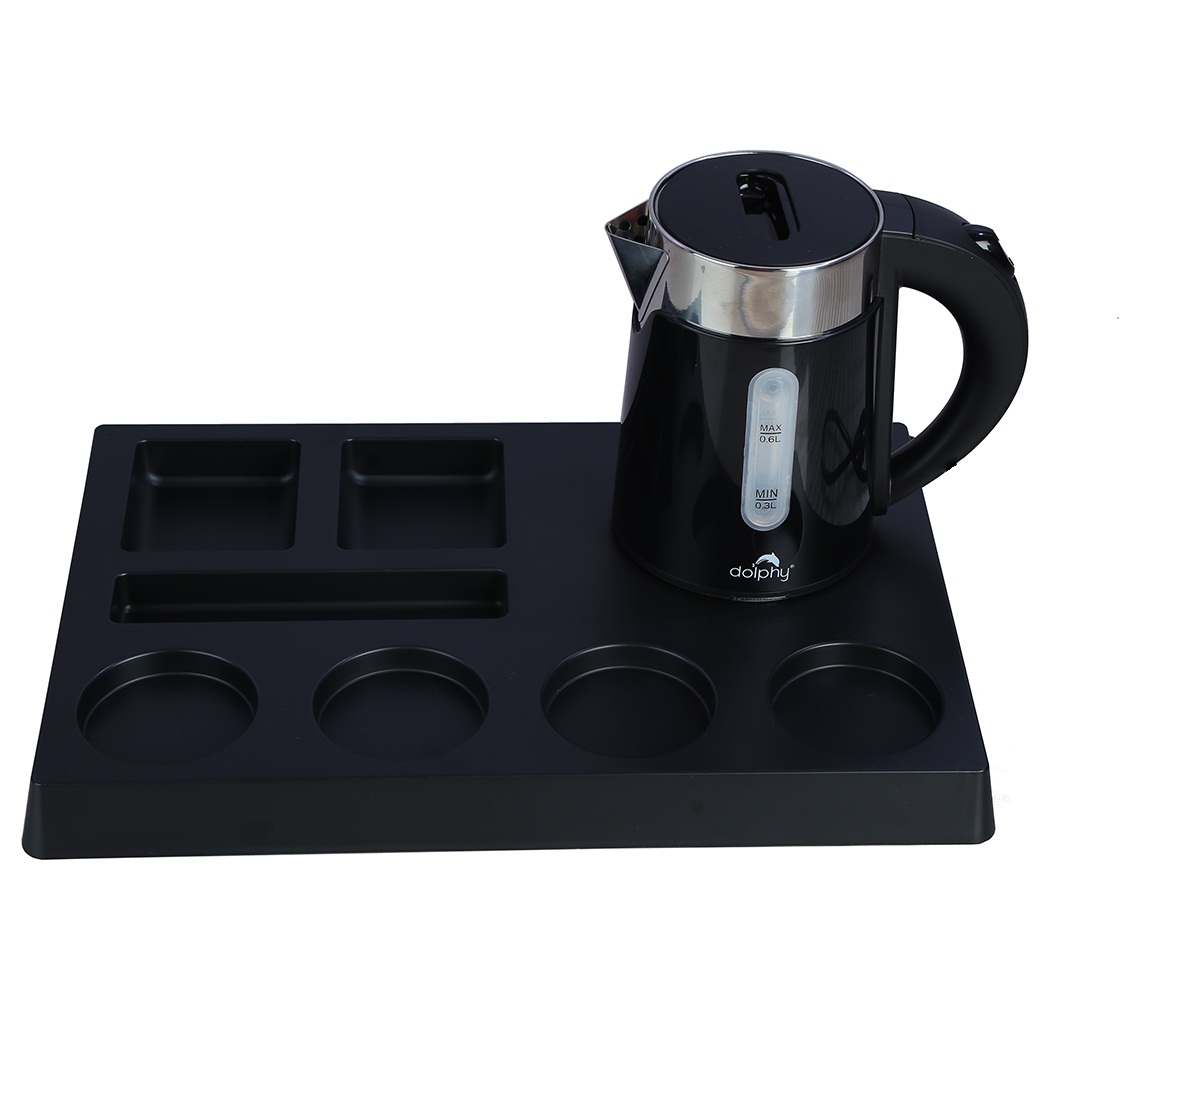 Black ABS electric kettle with black tray